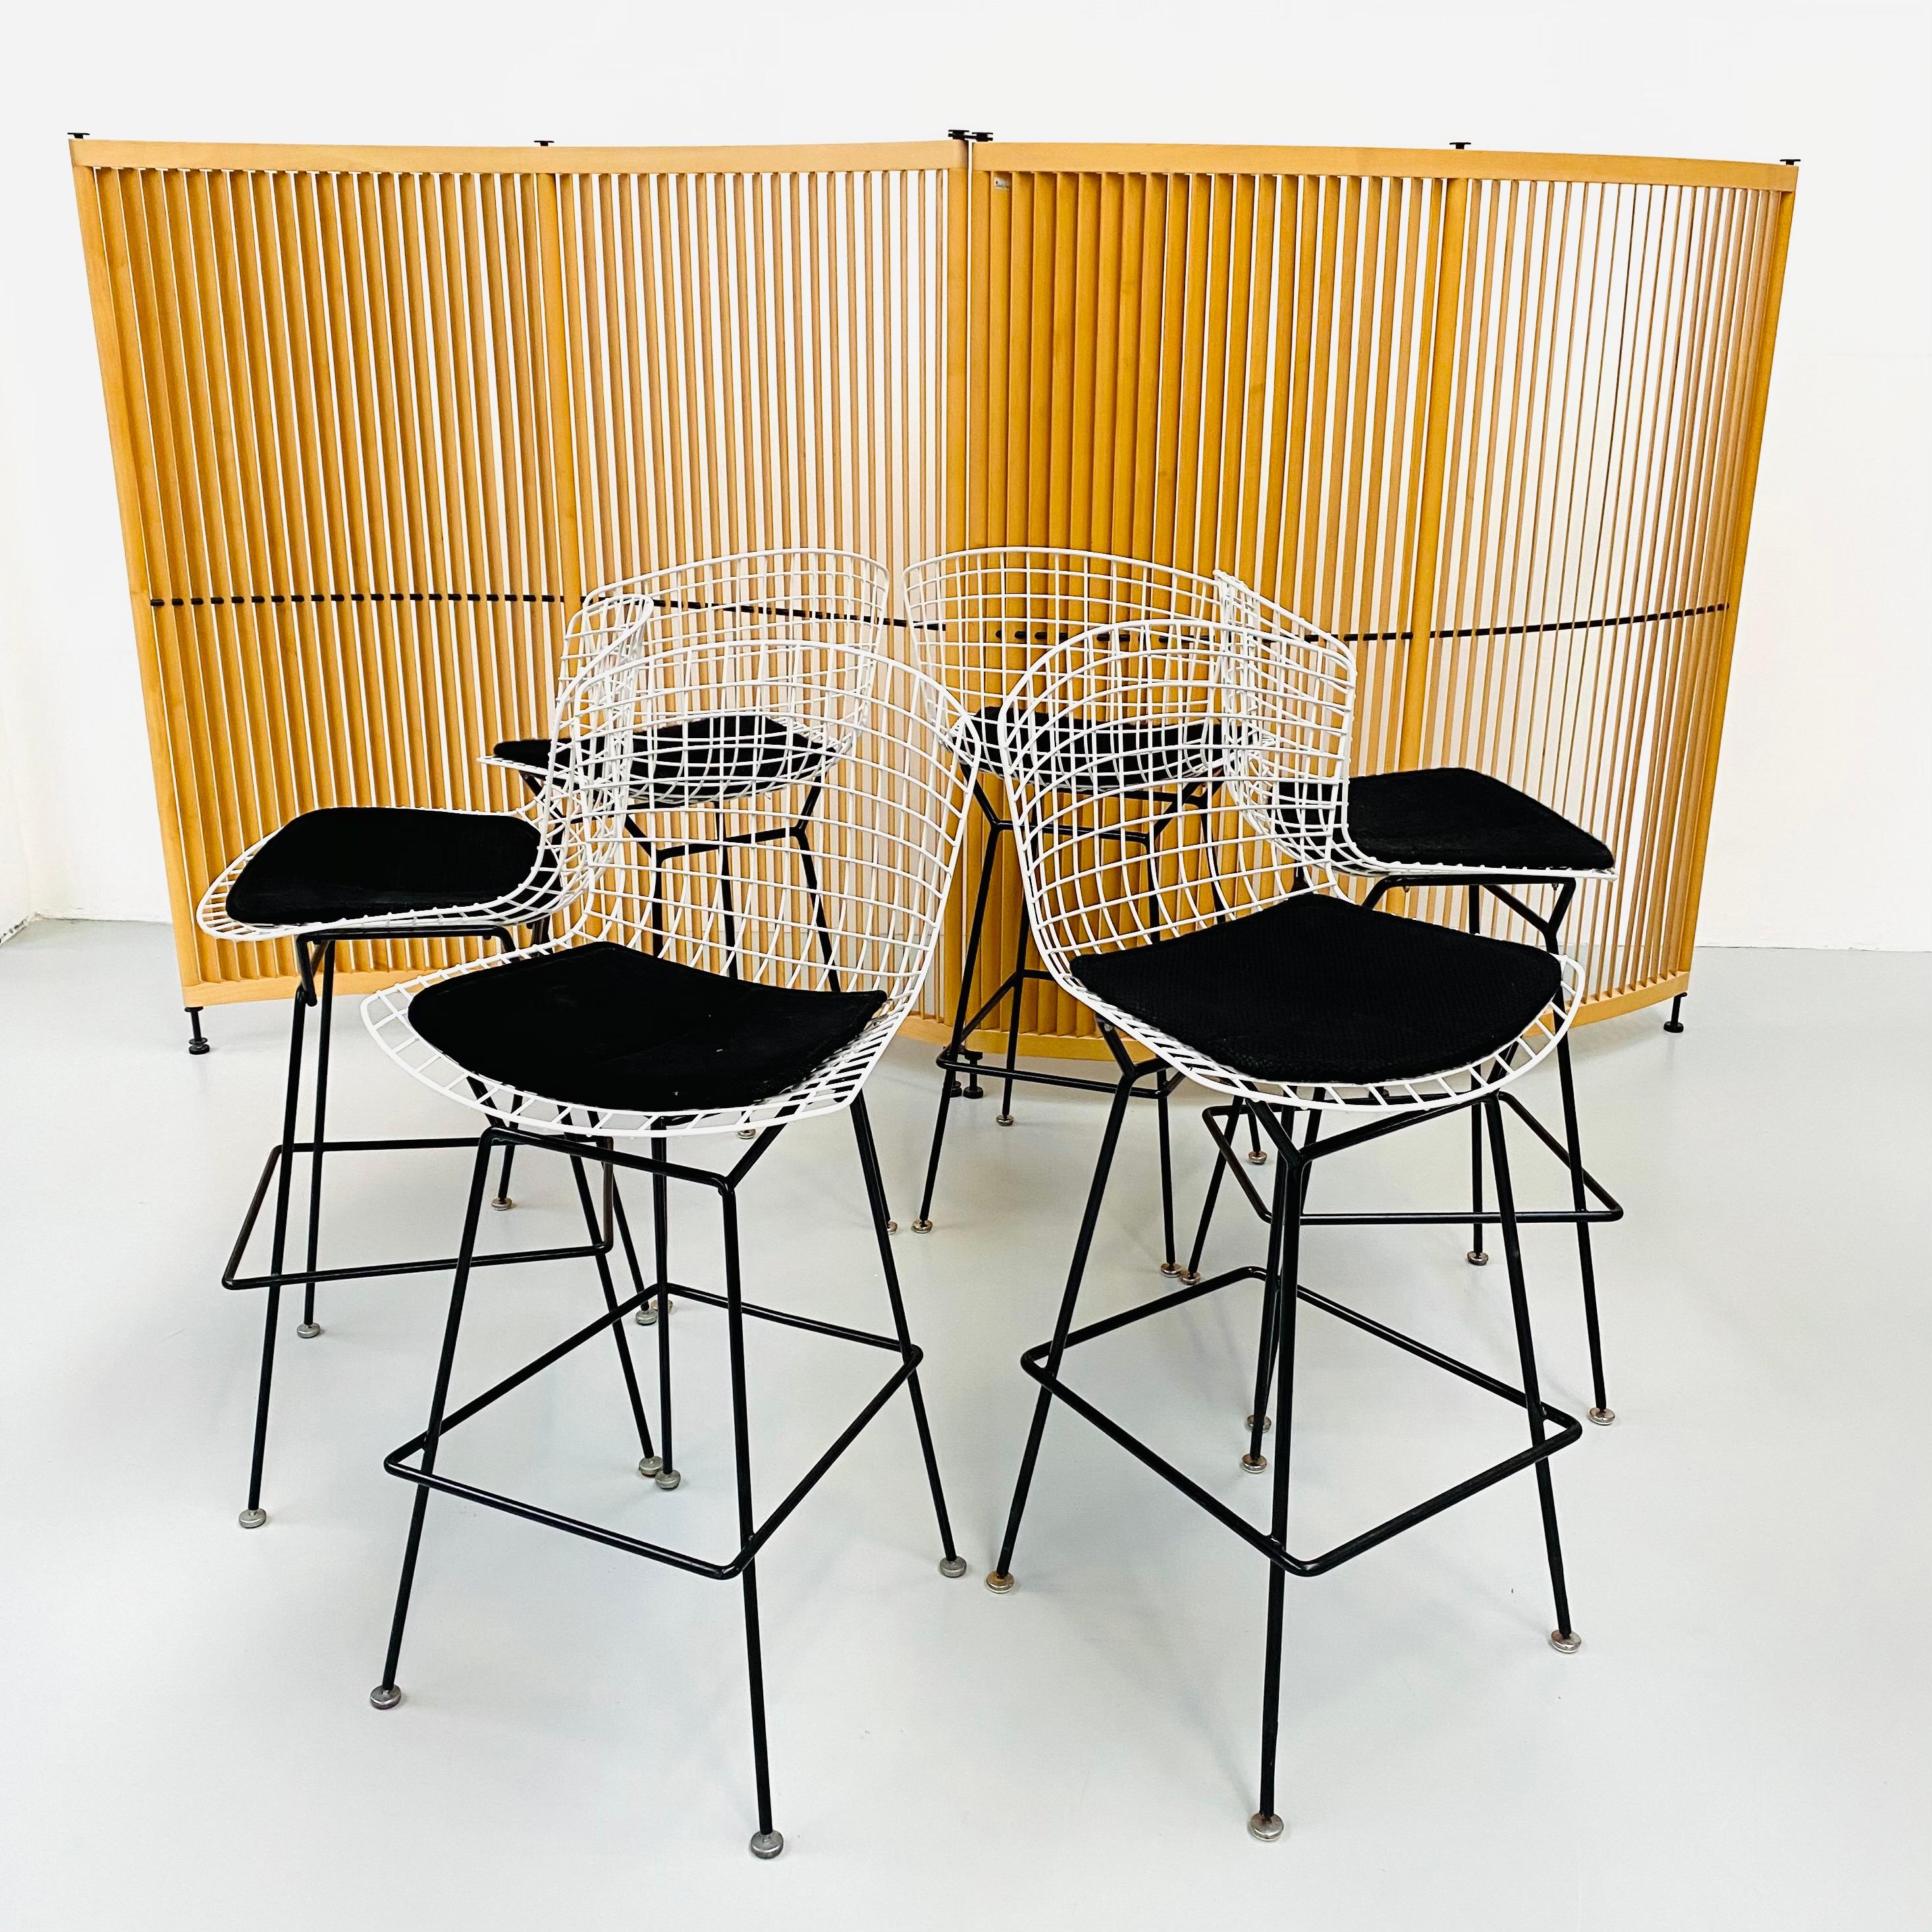 Metallic Thread Vintage Black & White Wire Barstools by Harry Bertoia for Knoll Inc, Set of 6